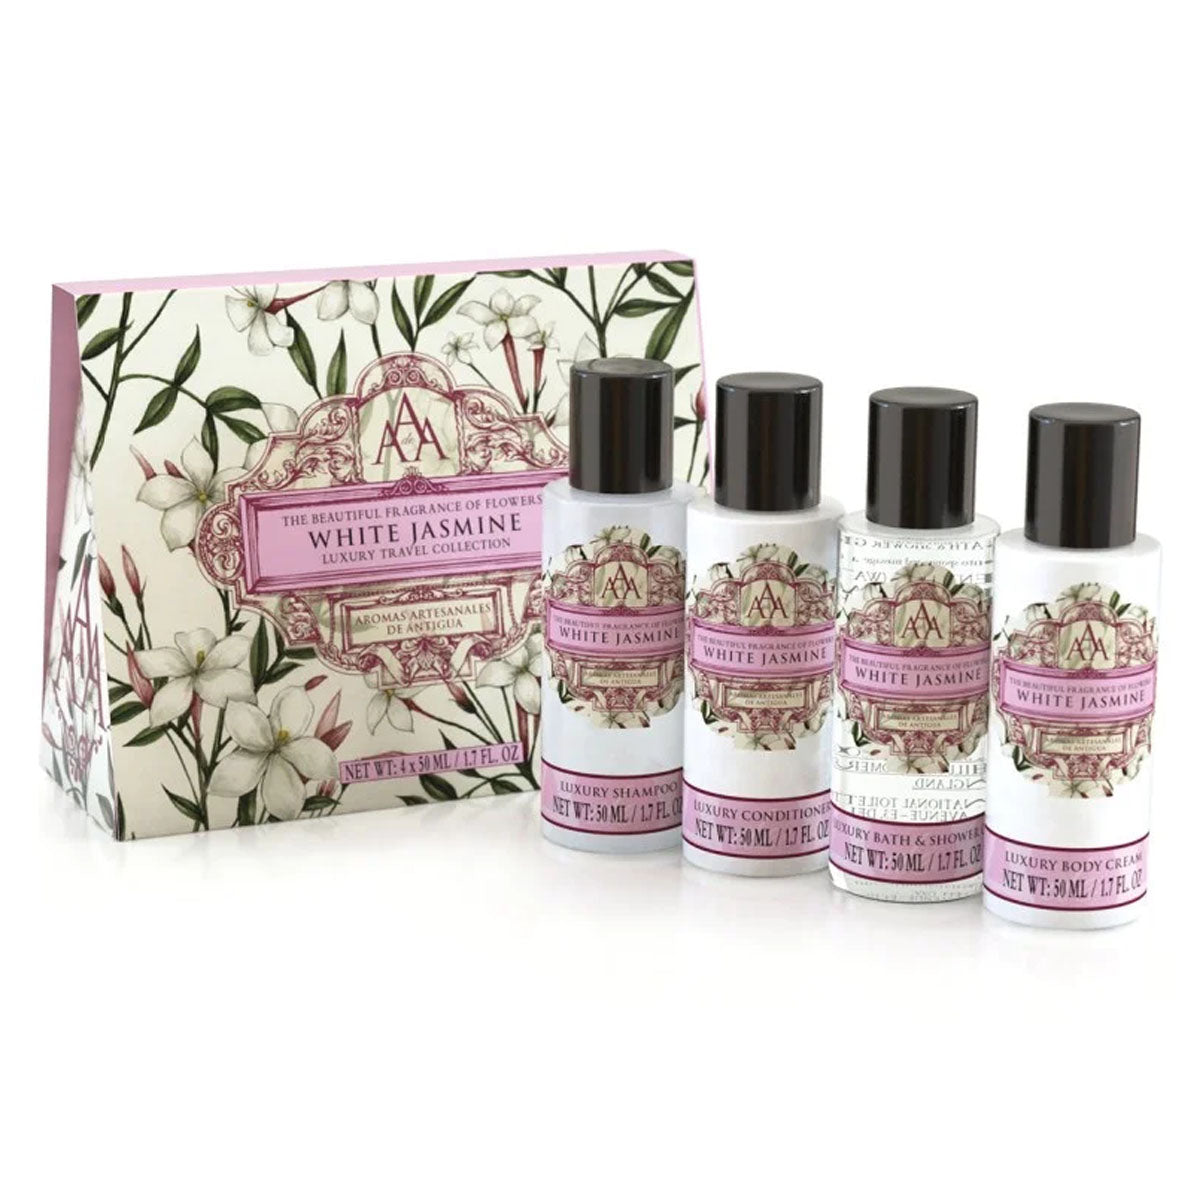 Summerset Toiletry - White Jasmine Travel Toiletry - Gift Set - Continental Food Store